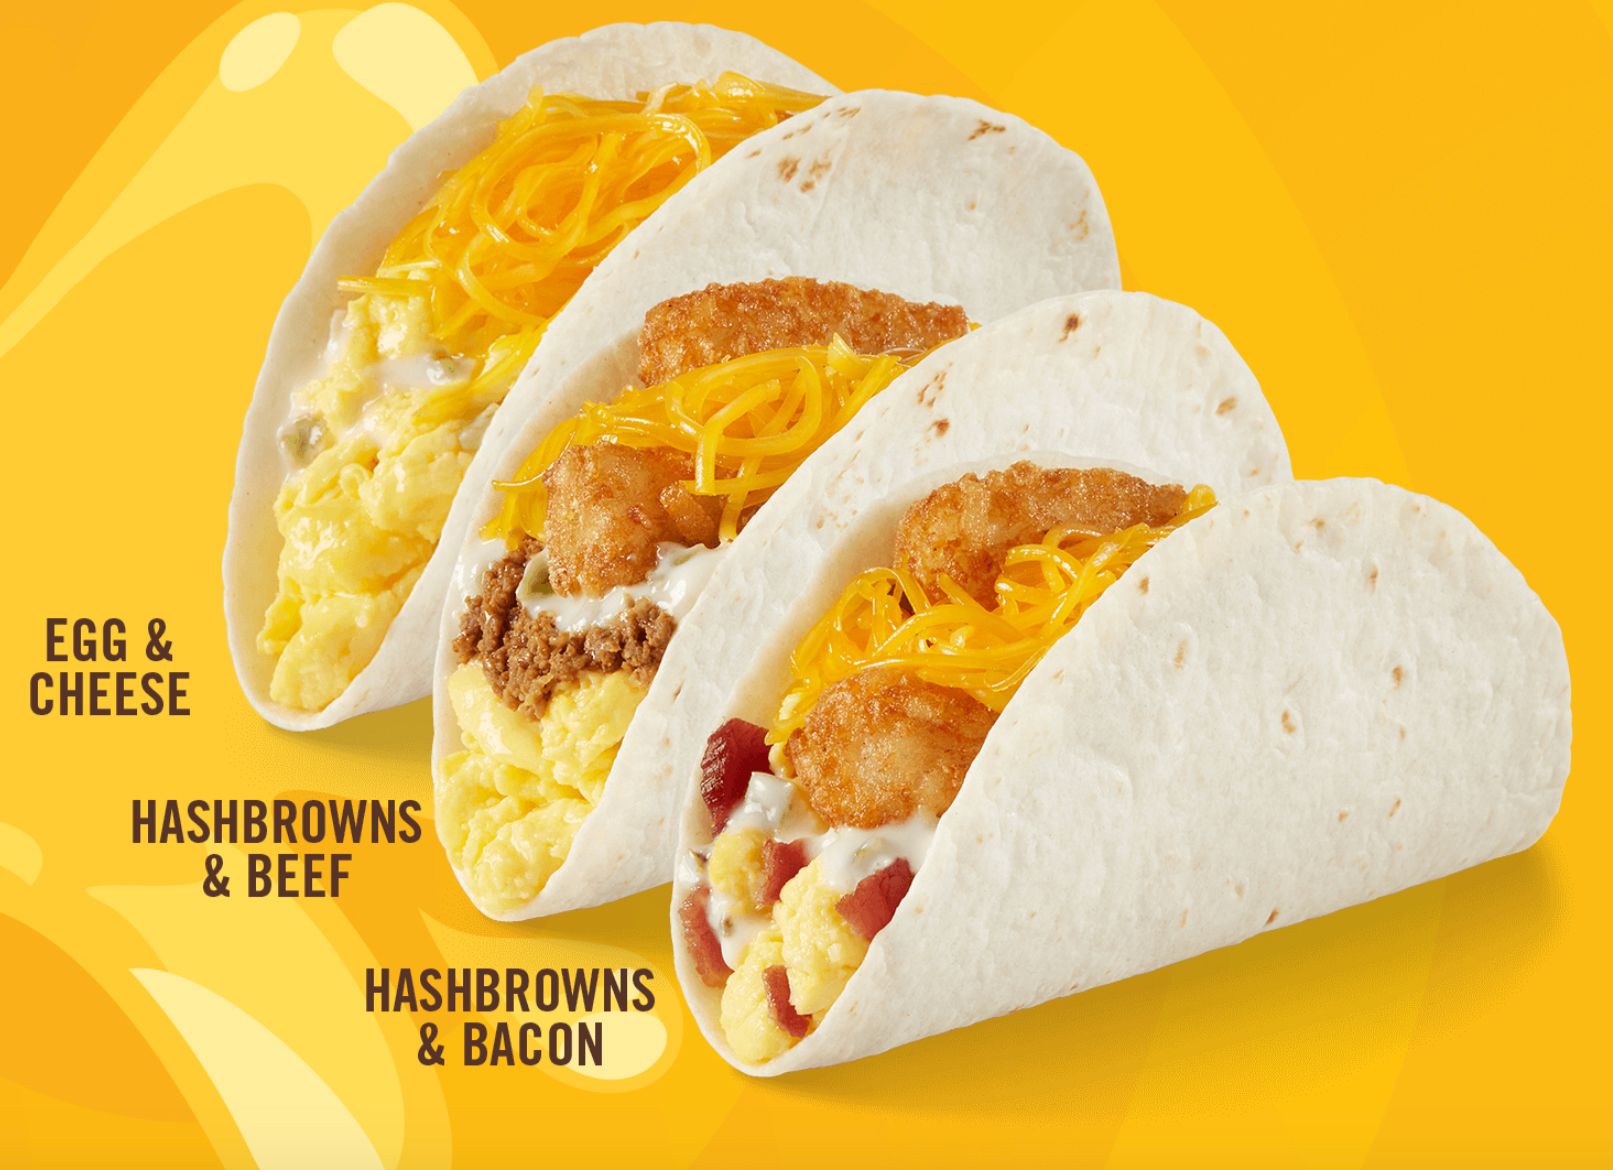 Del Taco Launches 3 New Double Cheese Breakfast Tacos